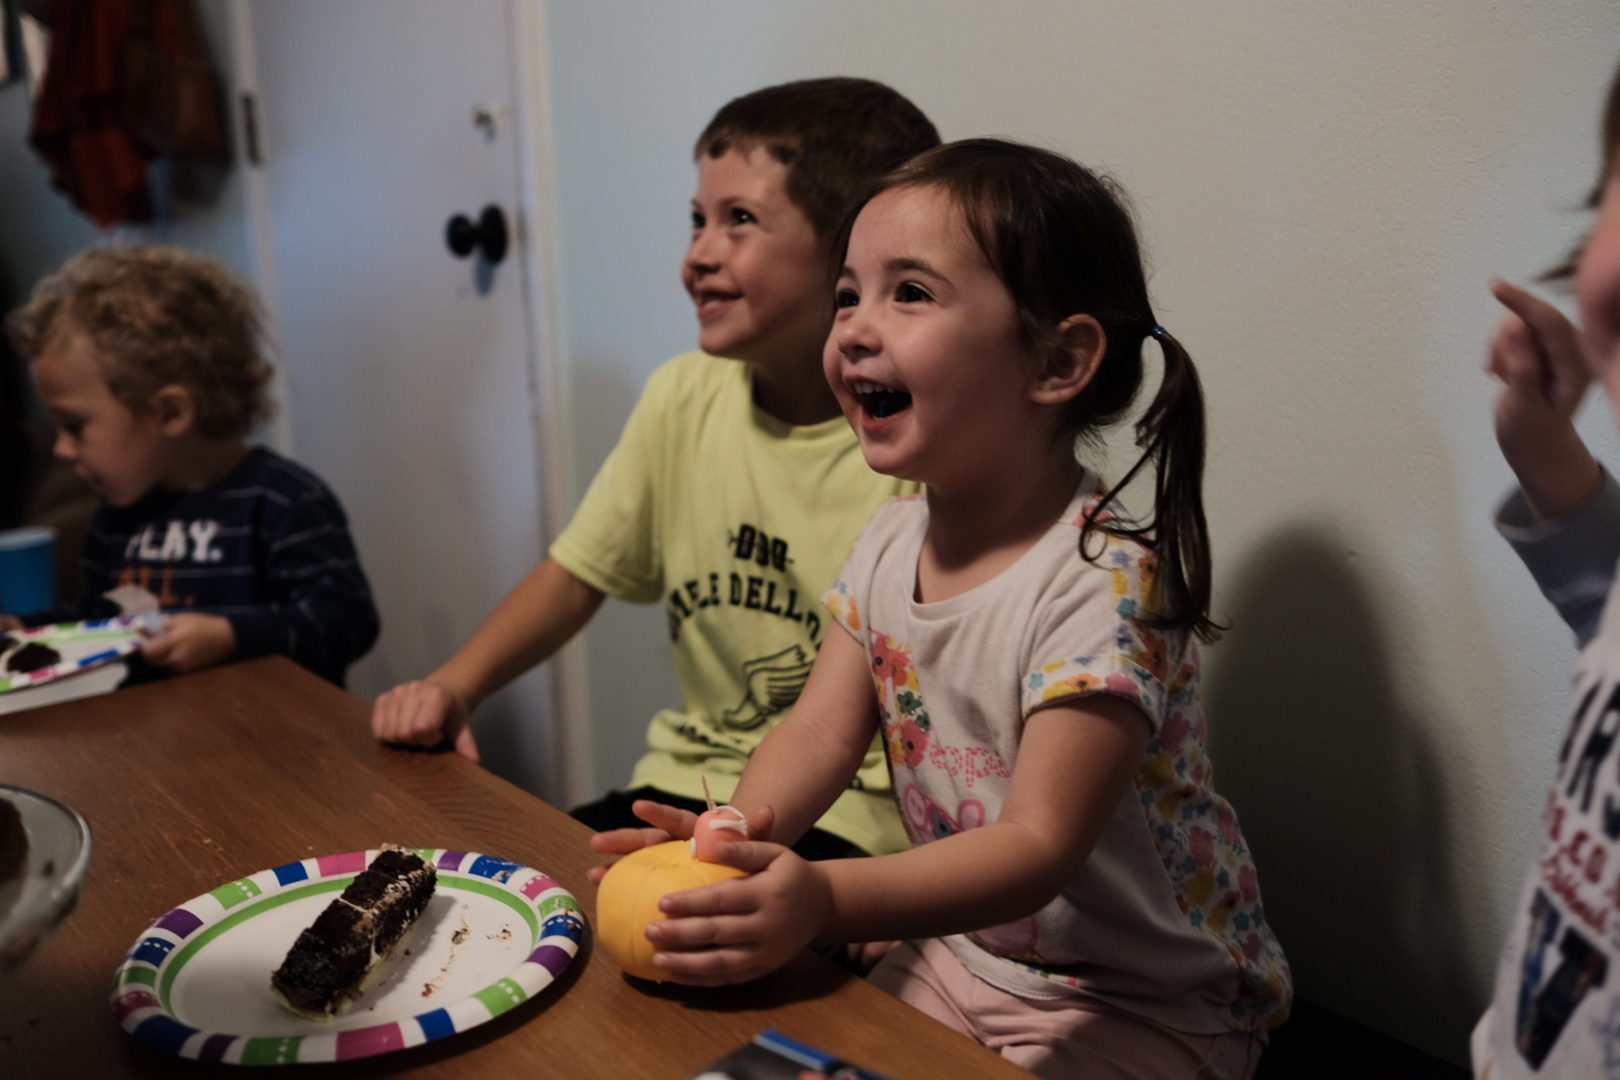 A little girl smiles while looking at her birthday cake (out of frame)